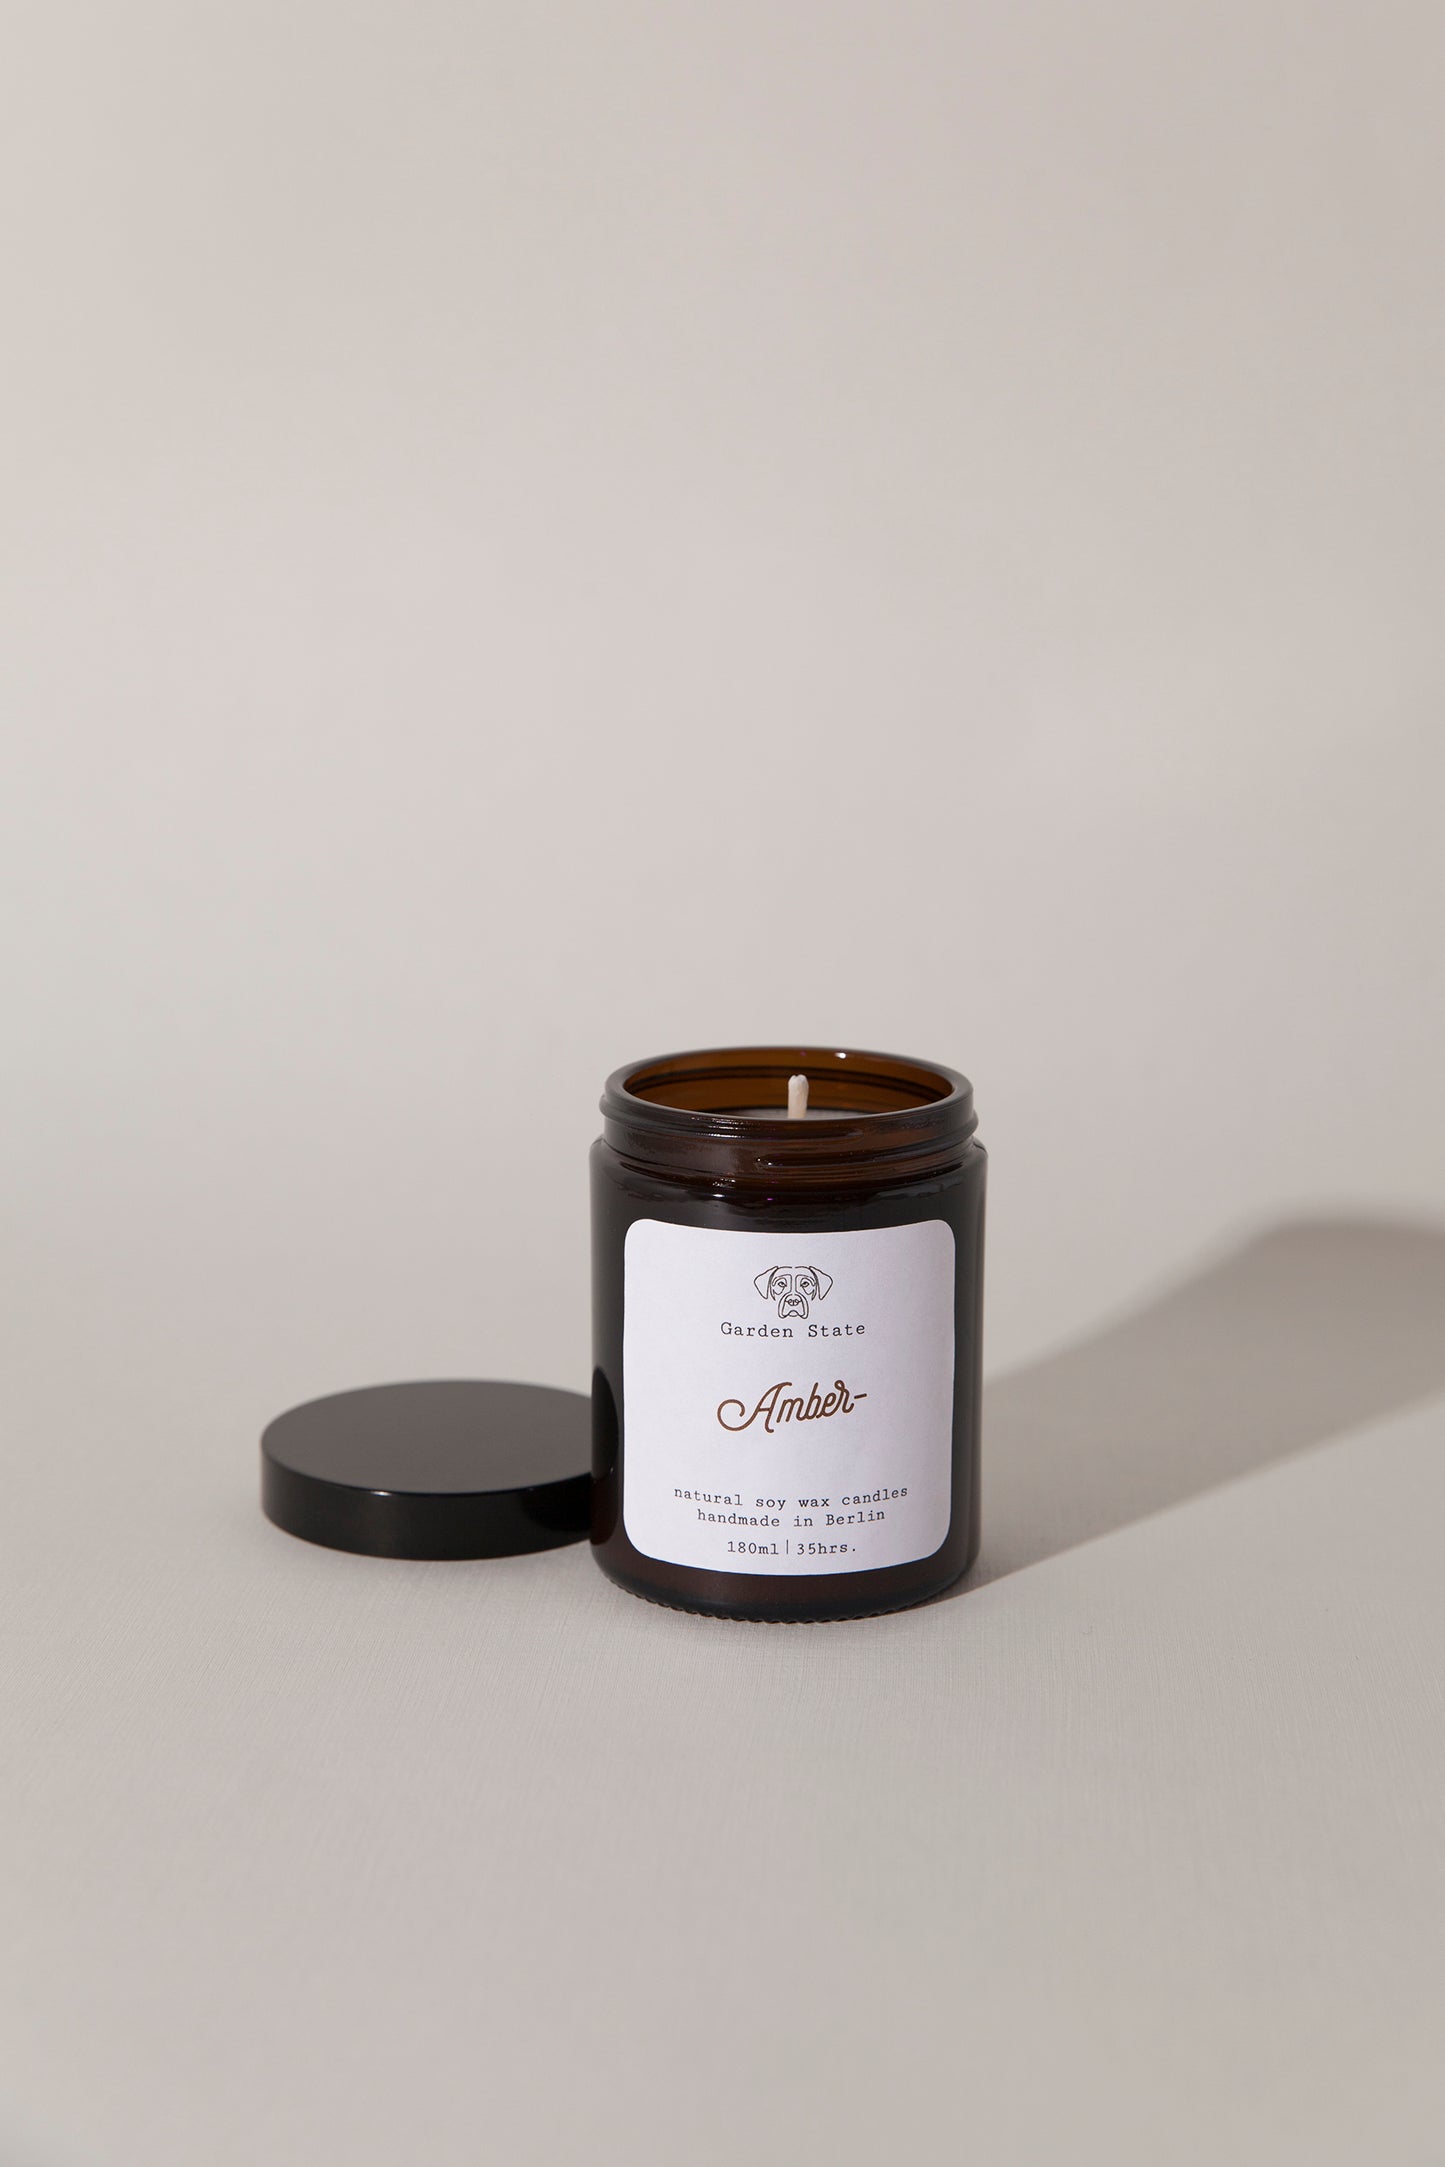 Amber Scented Candle